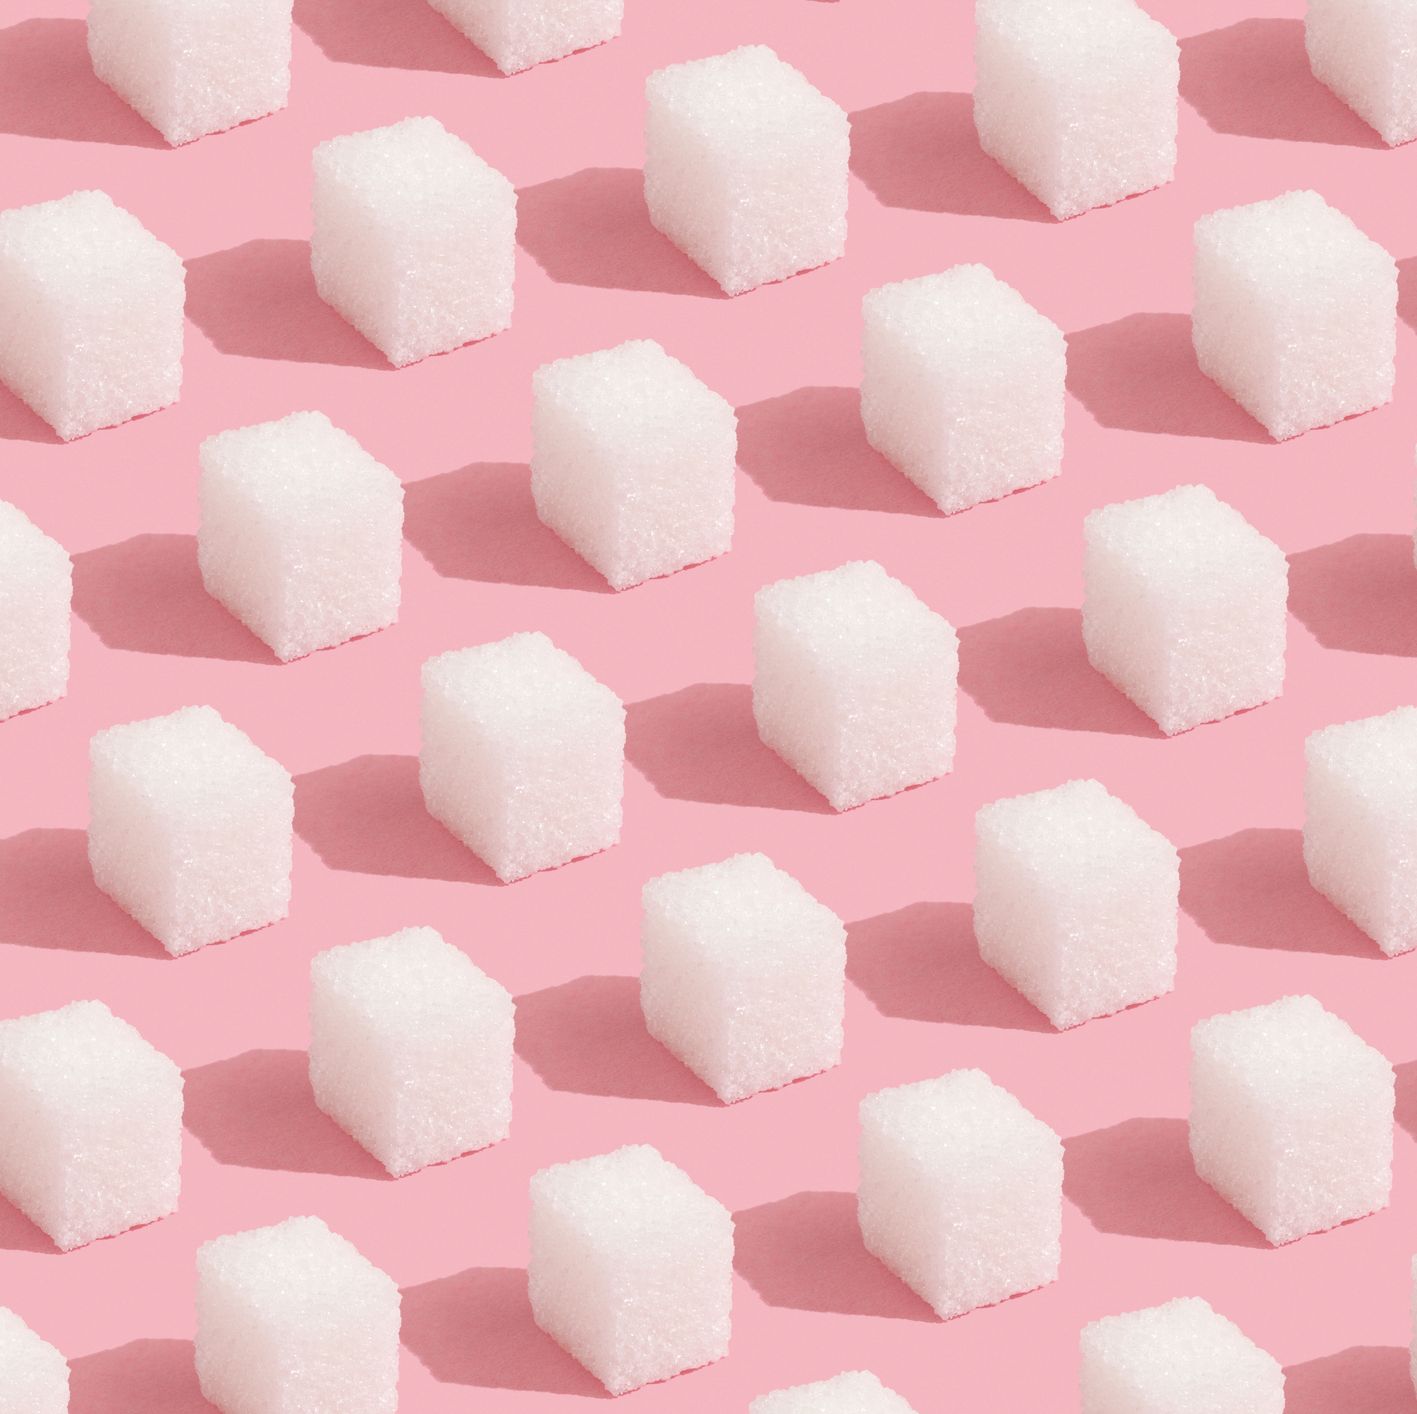 abstract pattern made of sugar cubes on pink minimal style background